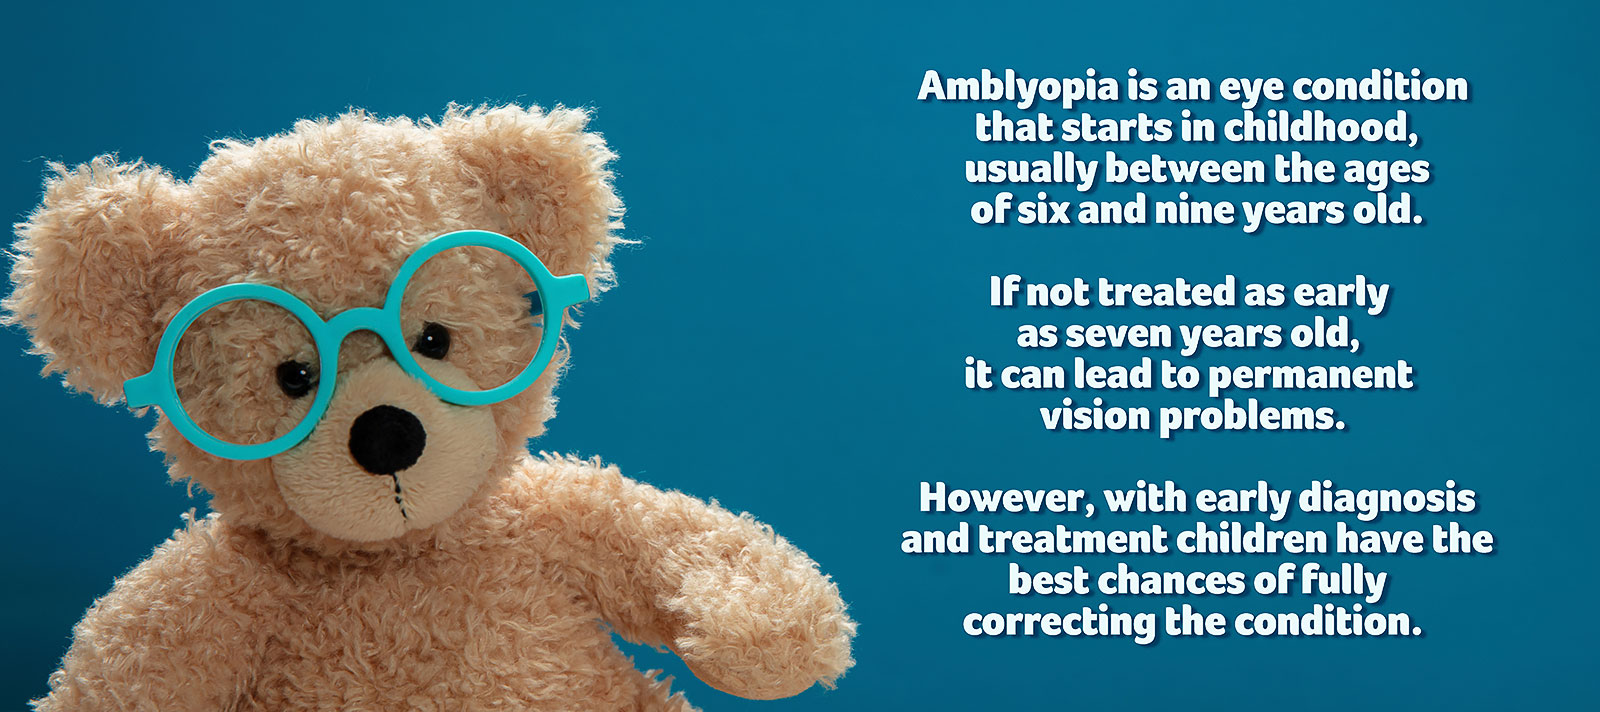 Infographic about the eye condition Amblyopia